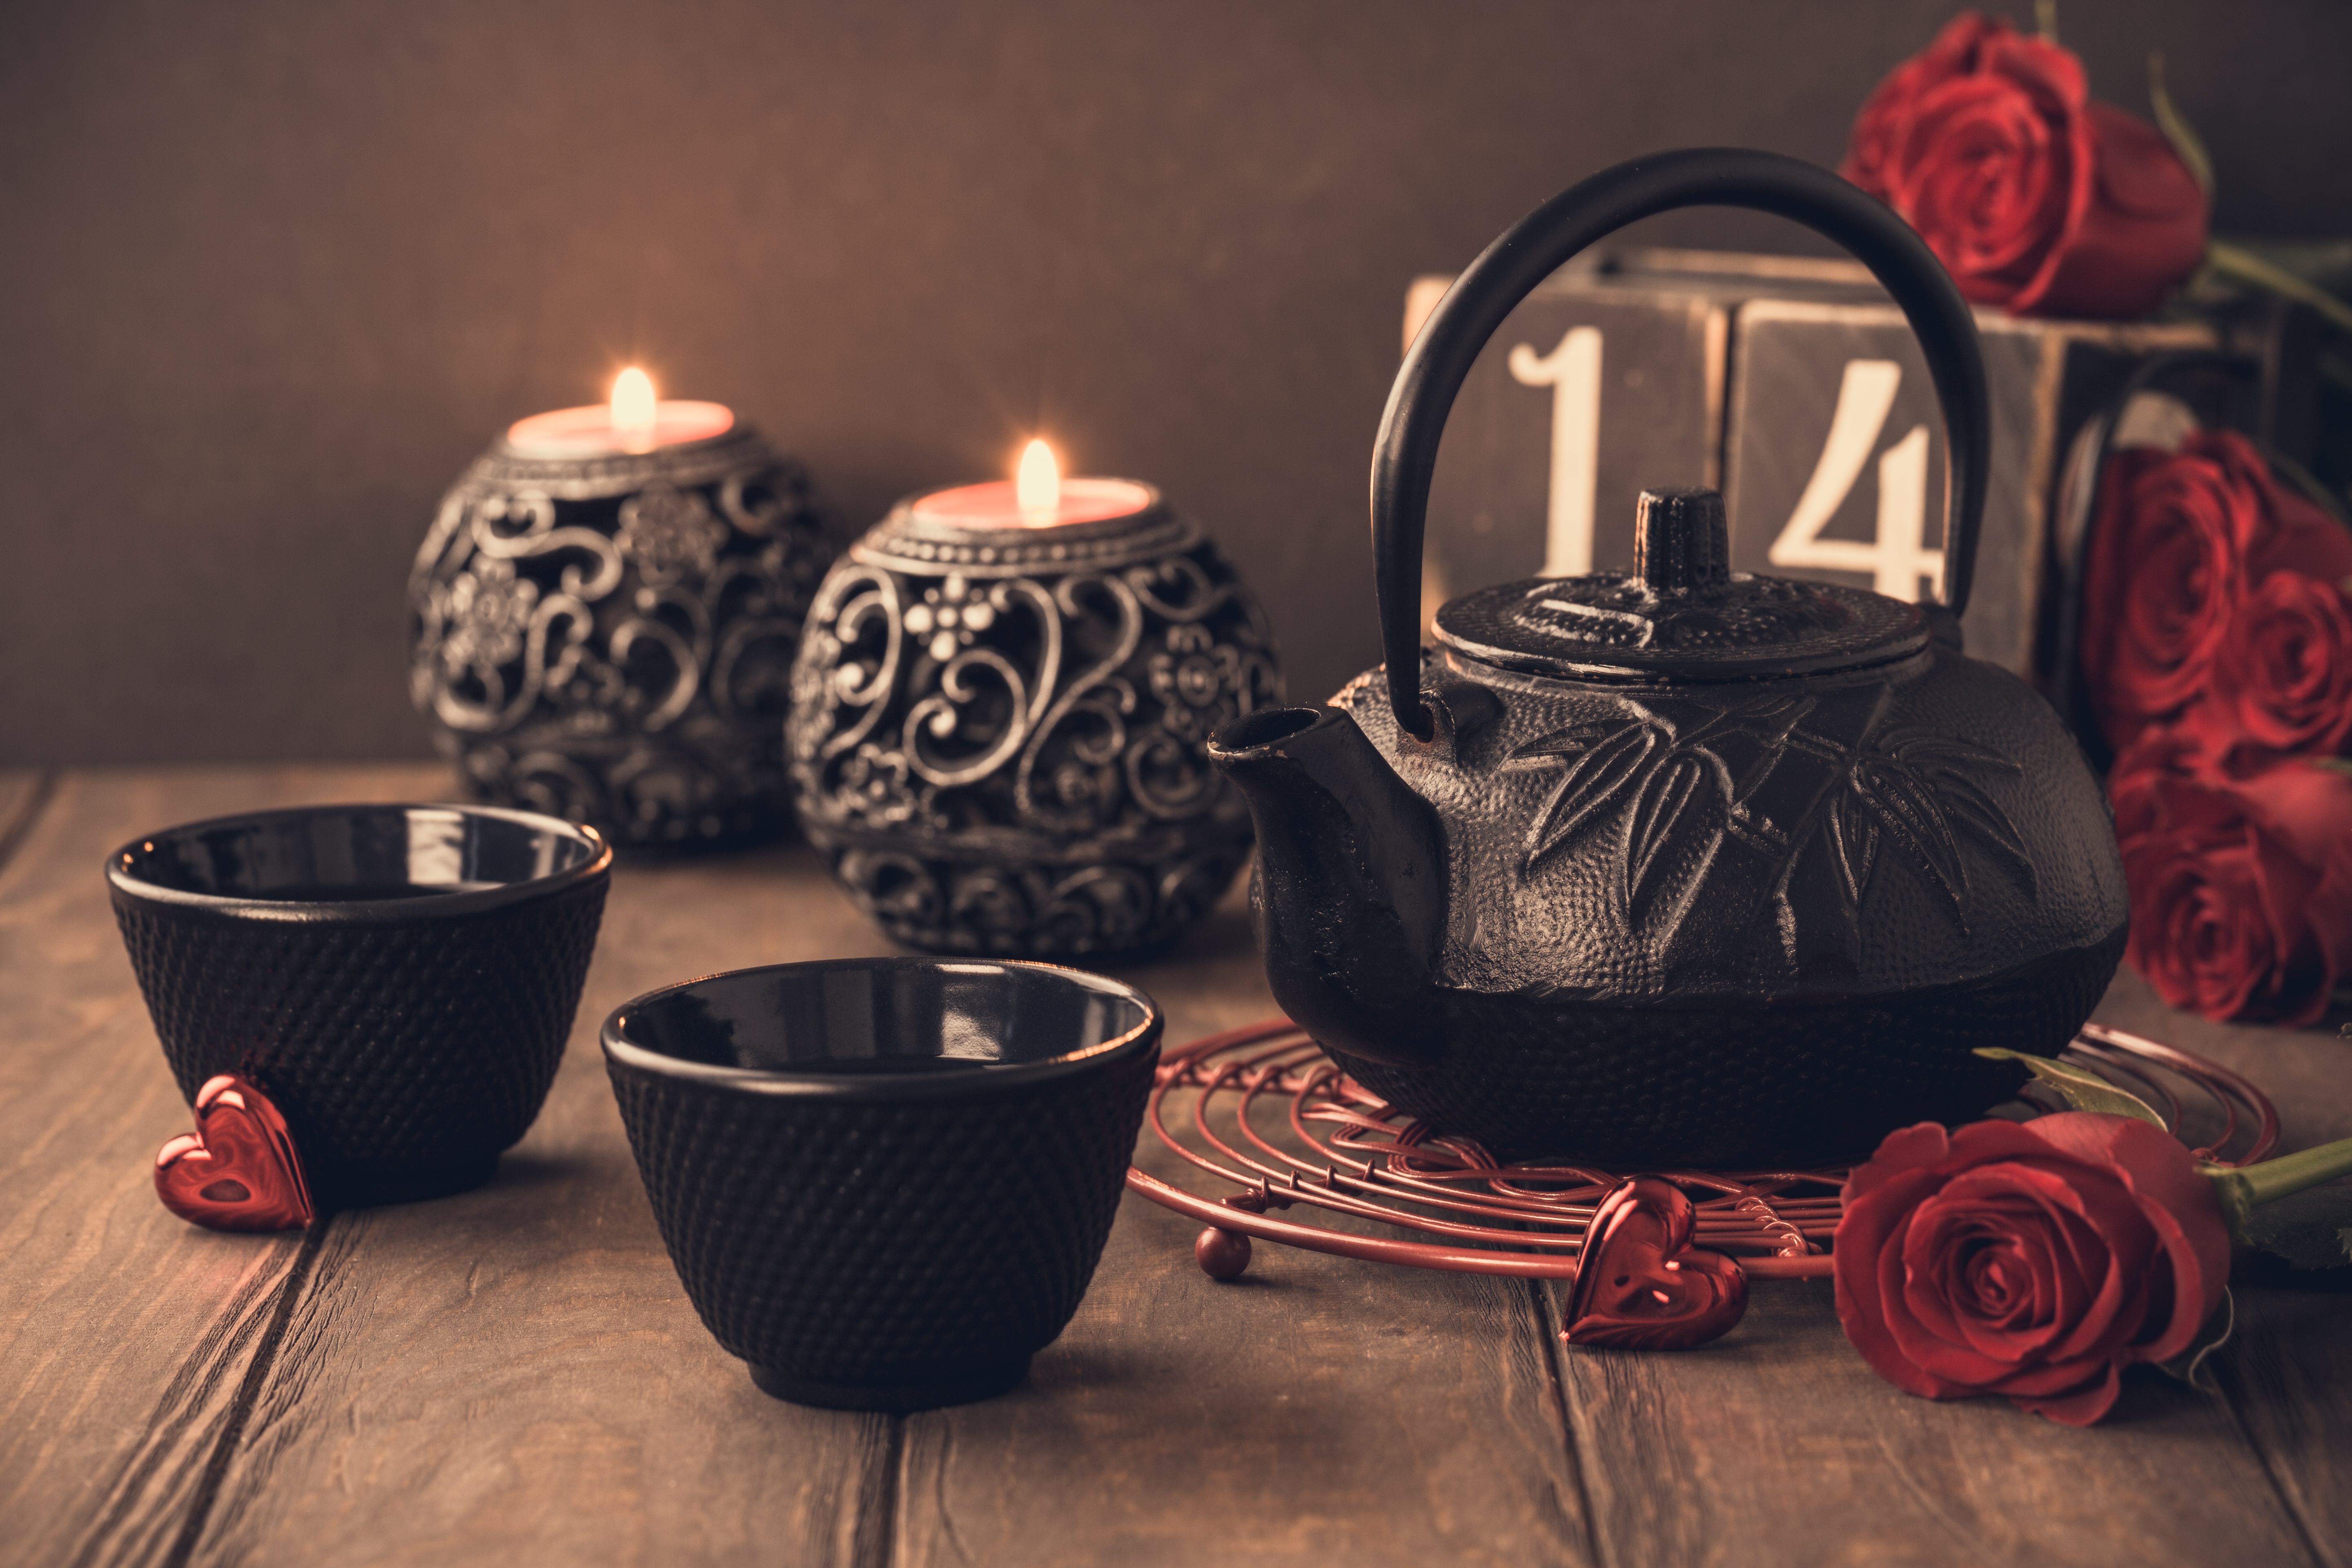 kettle, holiday, valentine's day, candle, cup, red flower, rose, still life HD wallpaper